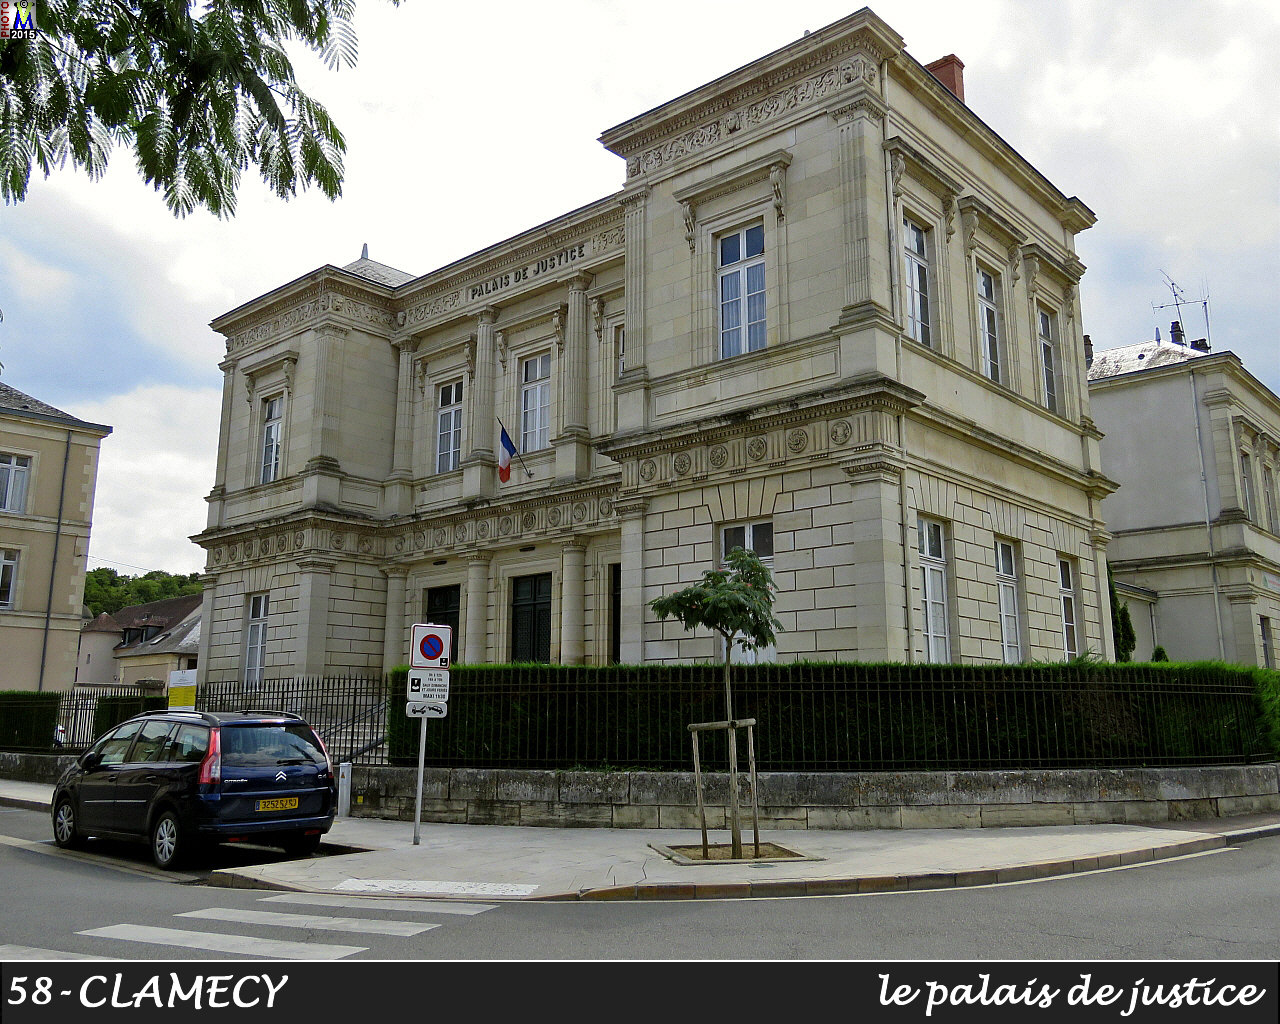 58CLAMECY-justice_100.jpg